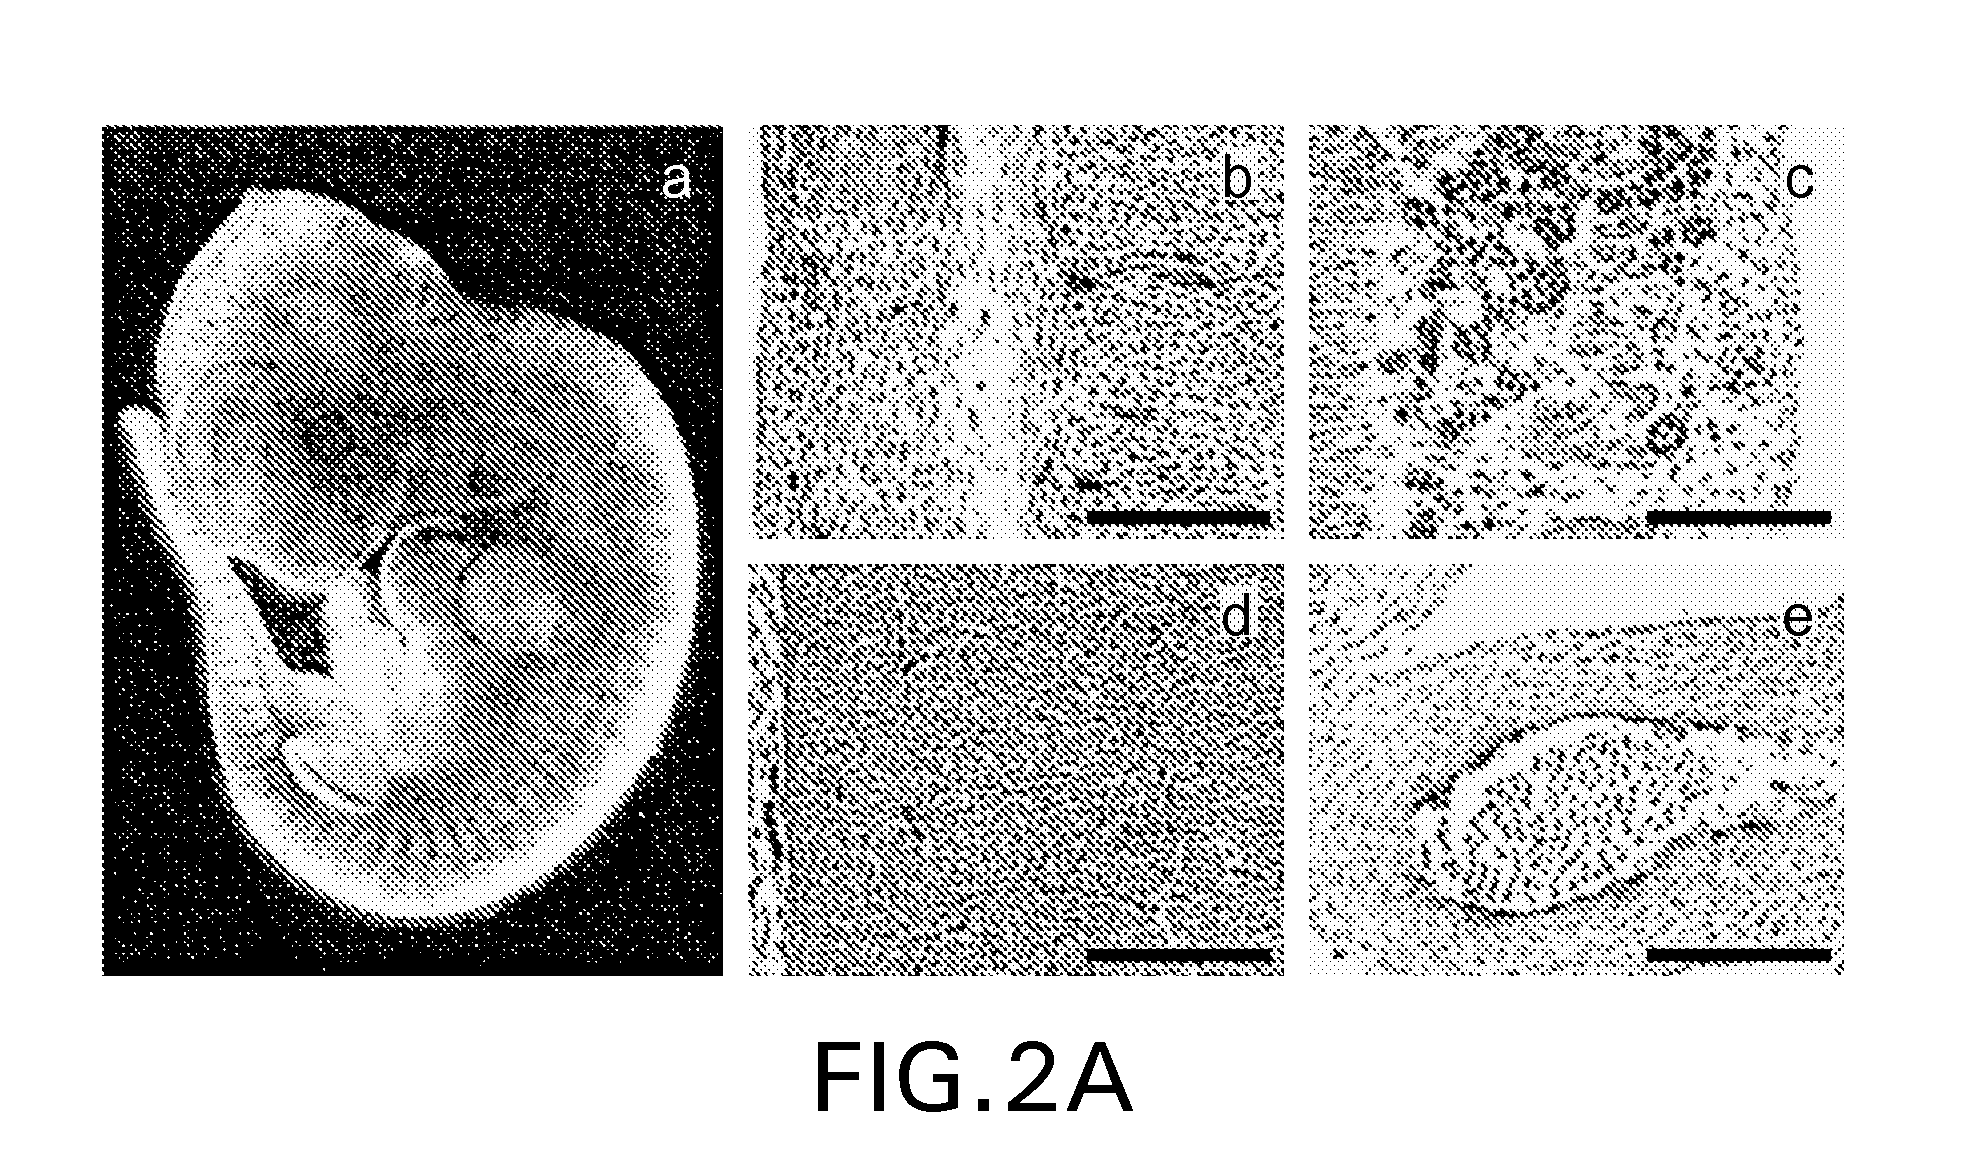 Micro-rna that promotes vascular integrity and uses thereof